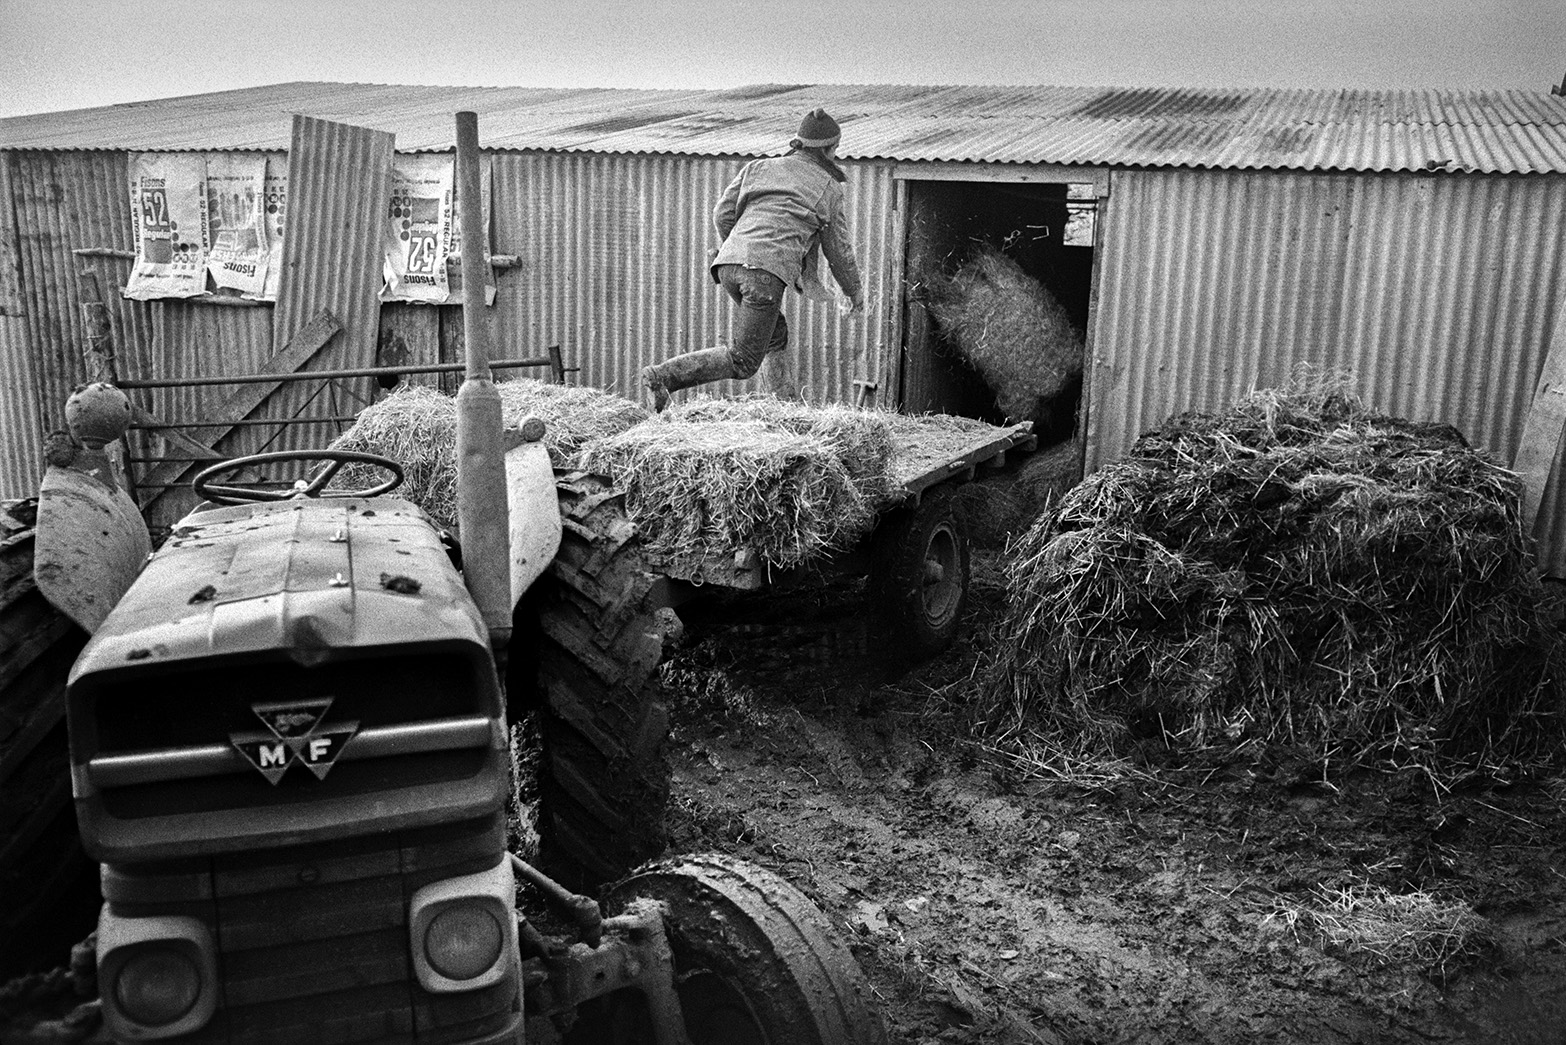 Derek Bright unloading hay bales from a trailer and putting them into a corrugated iron barn at Mill Road Farm, Beaford. He is throwing a bale into an open door. A muck heap is next to the barn and plastic sacks can be seen hanging up against the barn. The farm was also known as Jeffrys.